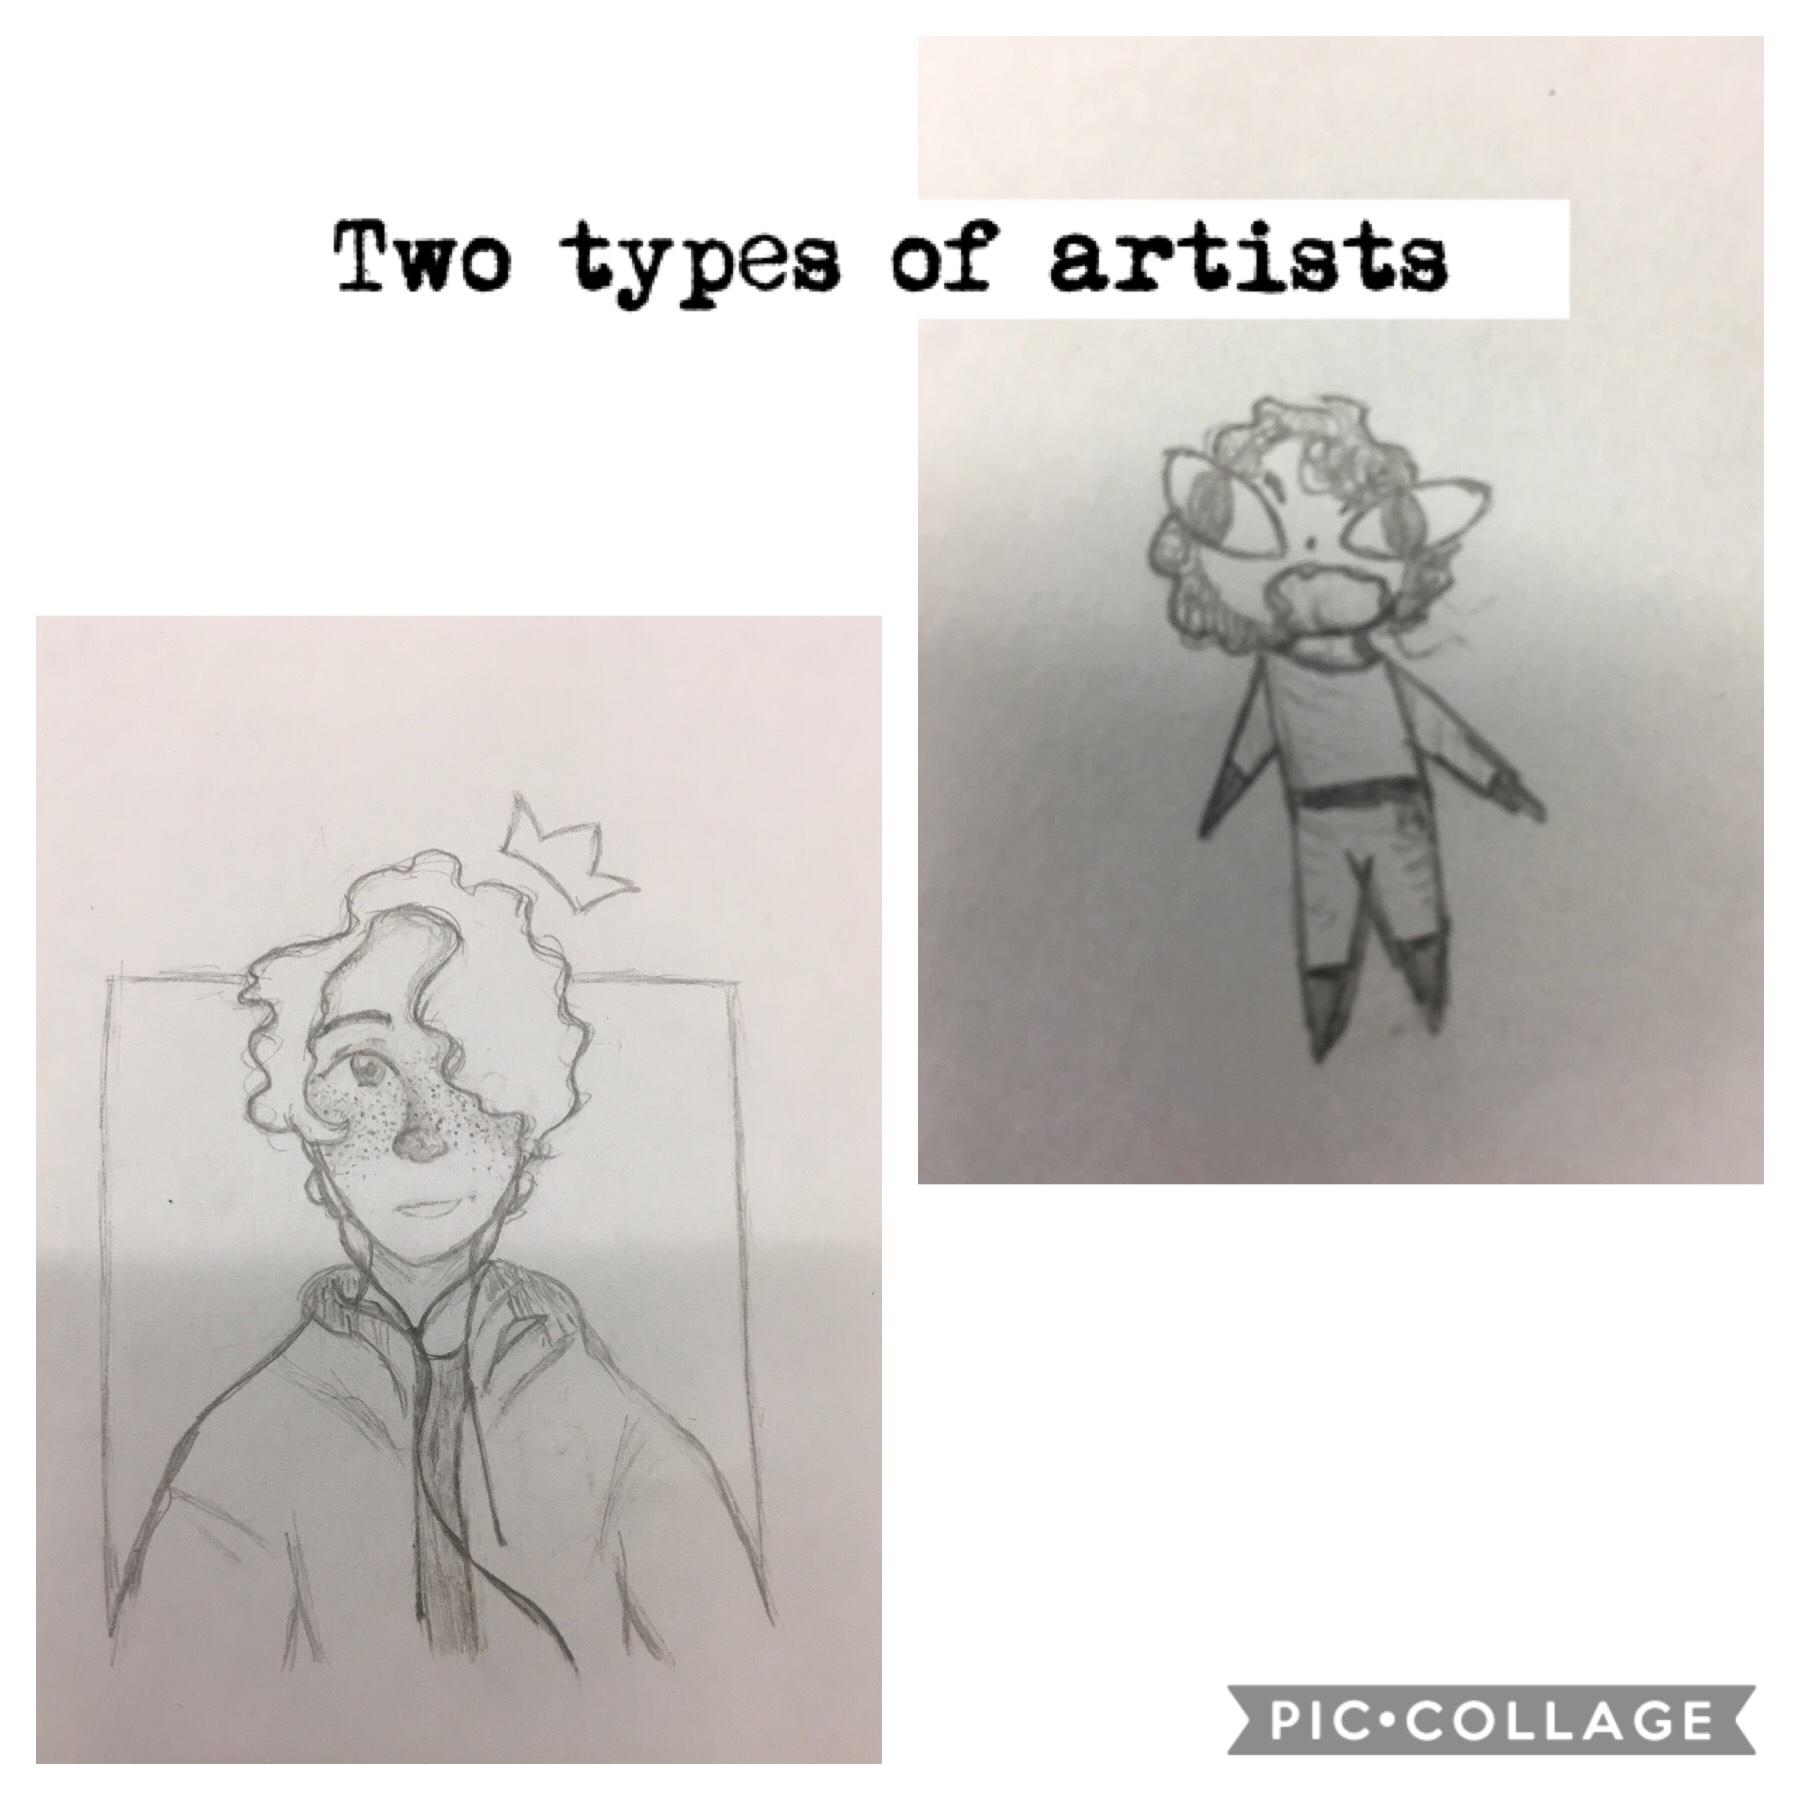 Drew both of these today and thought it was funny so here it is 😂